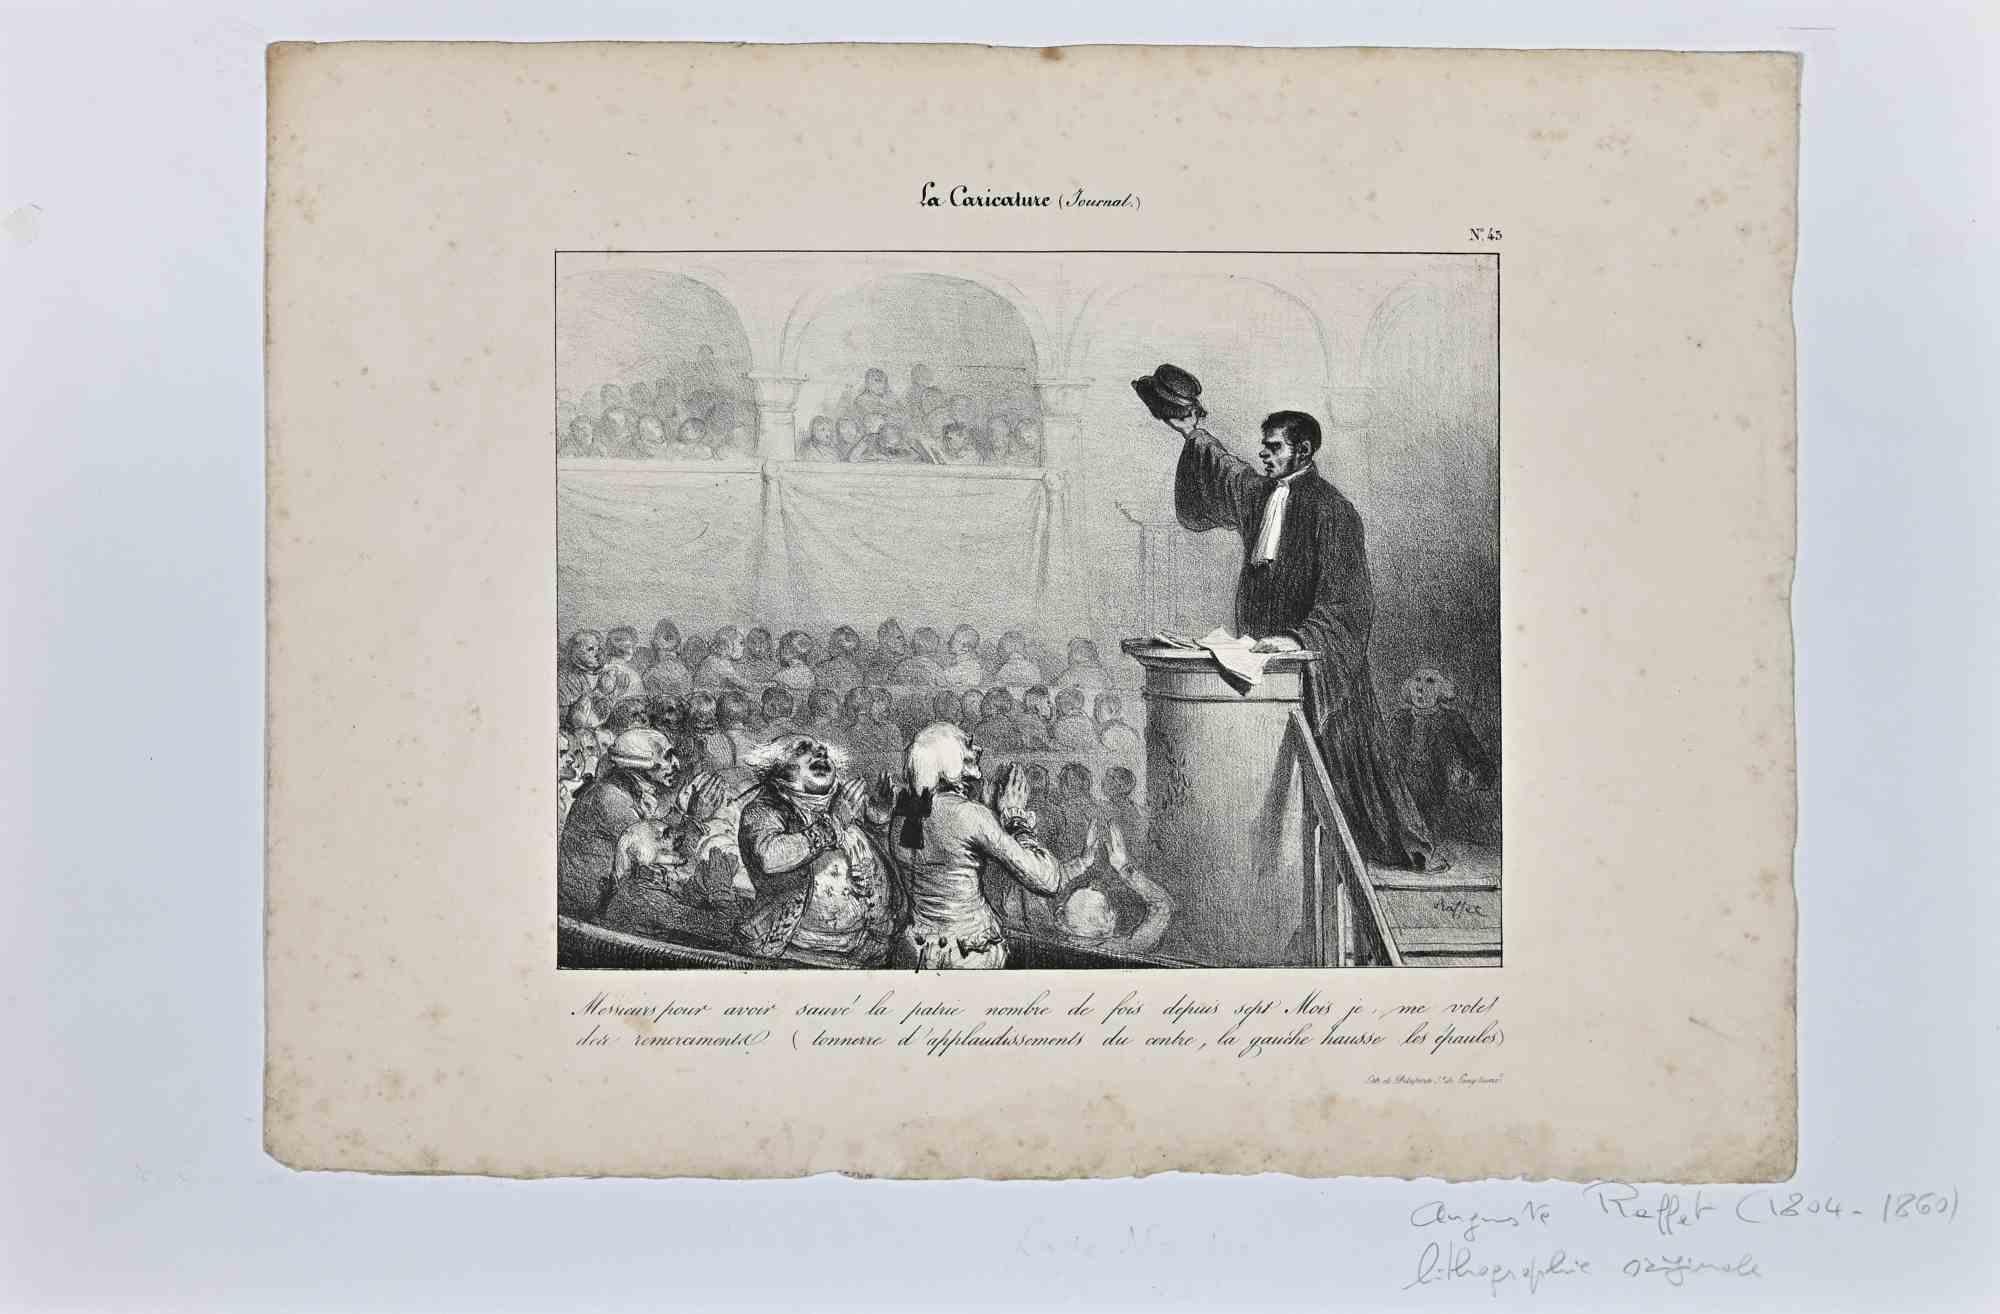 The National Assembly in Paris is a Lithograph realized by Auguste Raffet (1804-1860).

Good condition on a yellowed paper. Published on the Satirical Newspaper "La Caricature".

Hand signed by the artist on the lower right corner.

Limited edition,